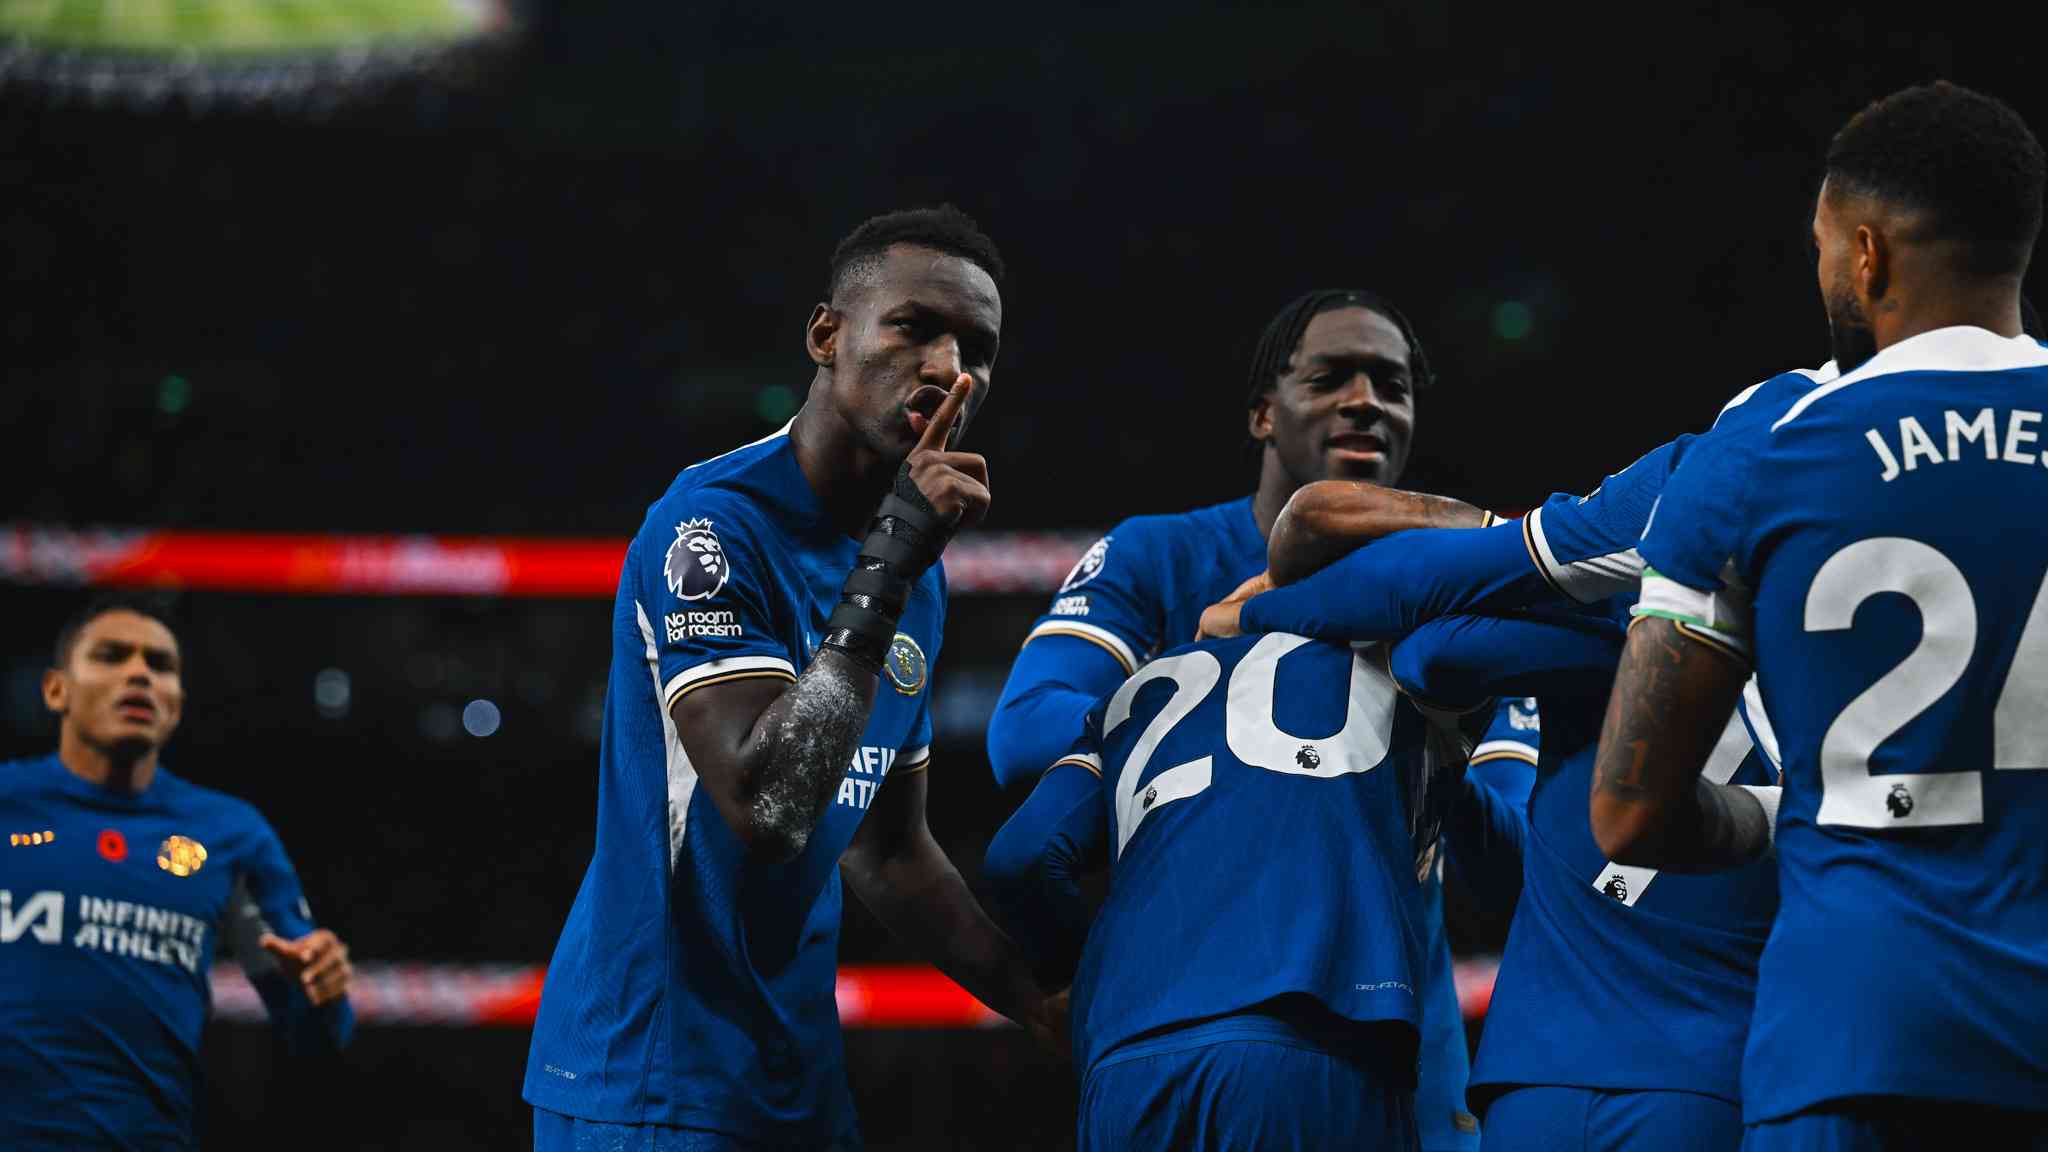 Jackson scores hat trick as 9-man Tottenham loses to Chelsea and remaining unbeaten record